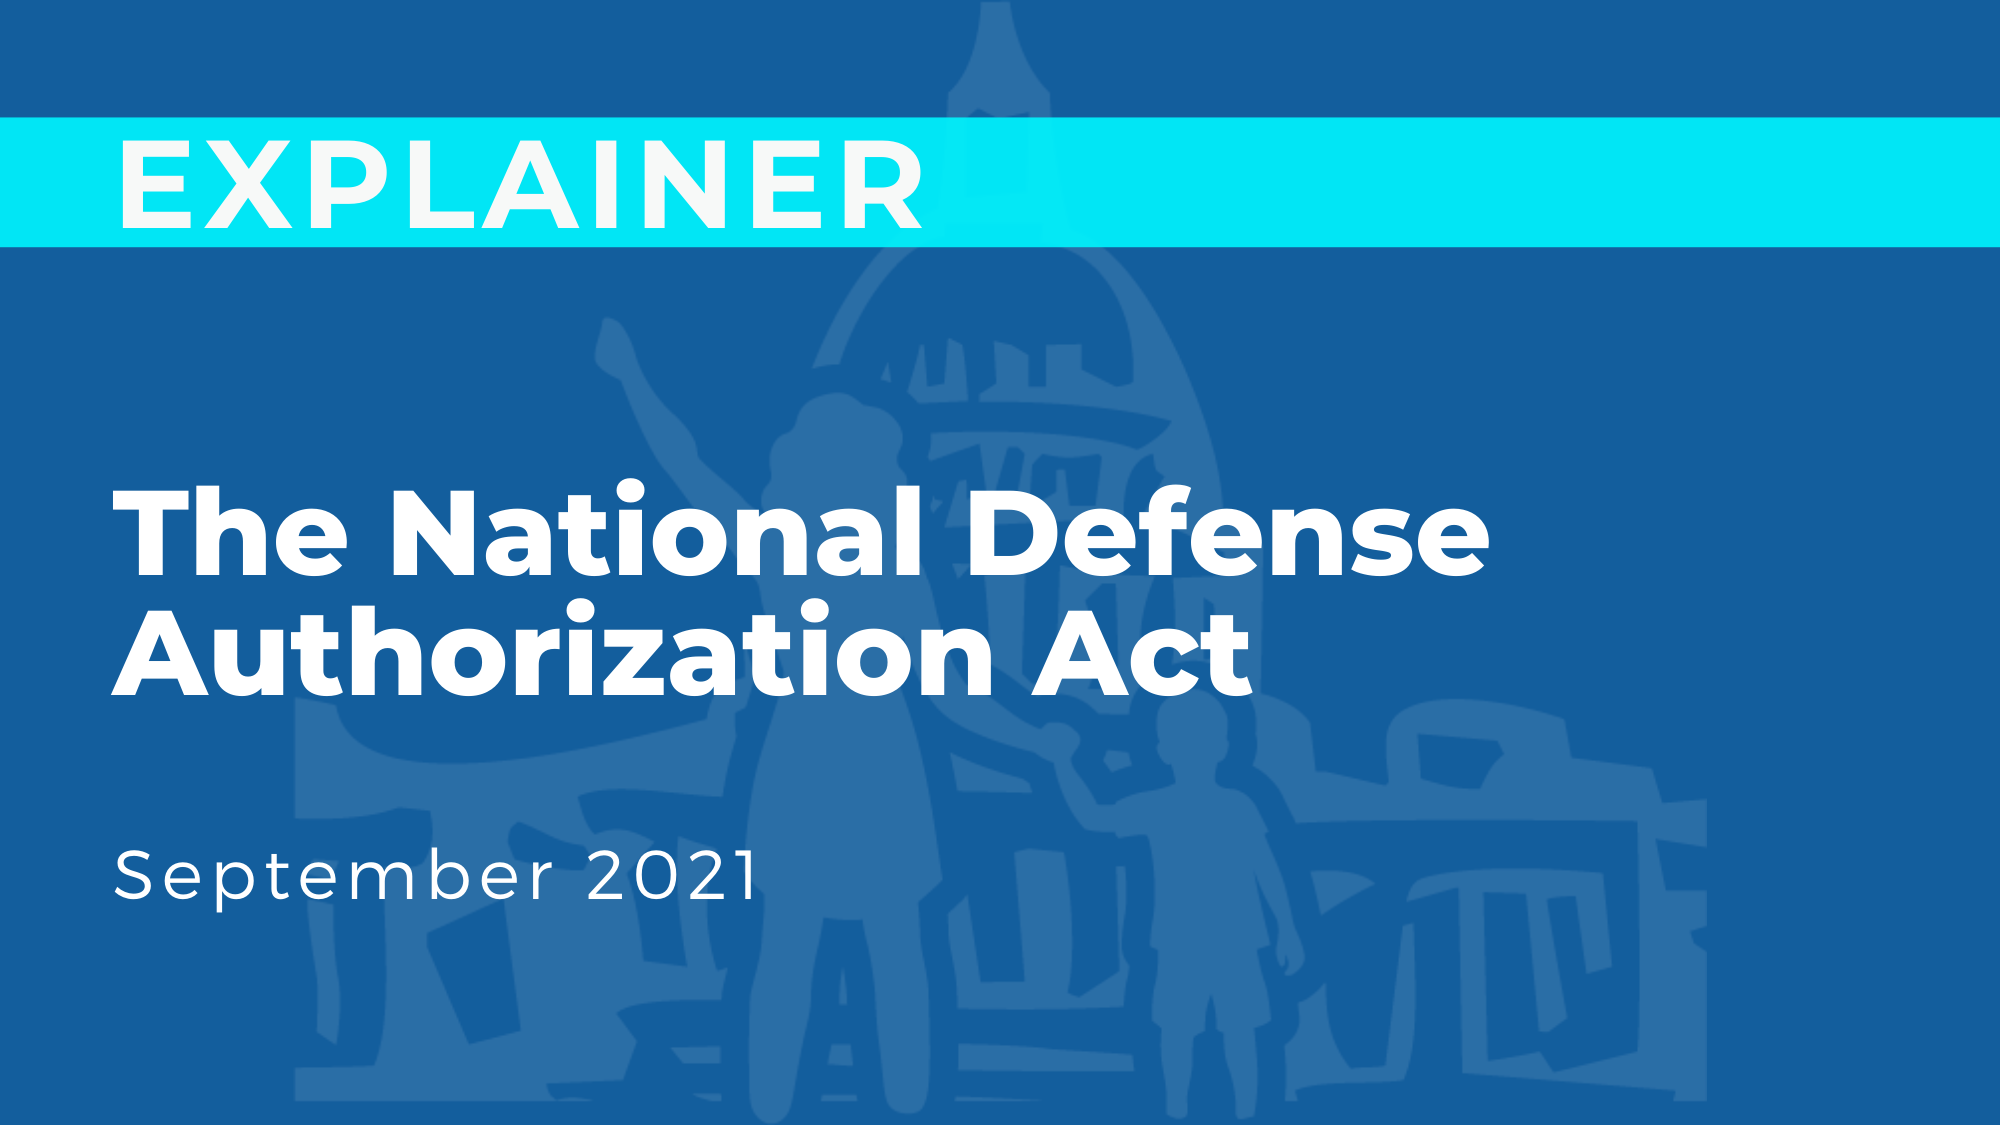 The National Defense Authorization Act